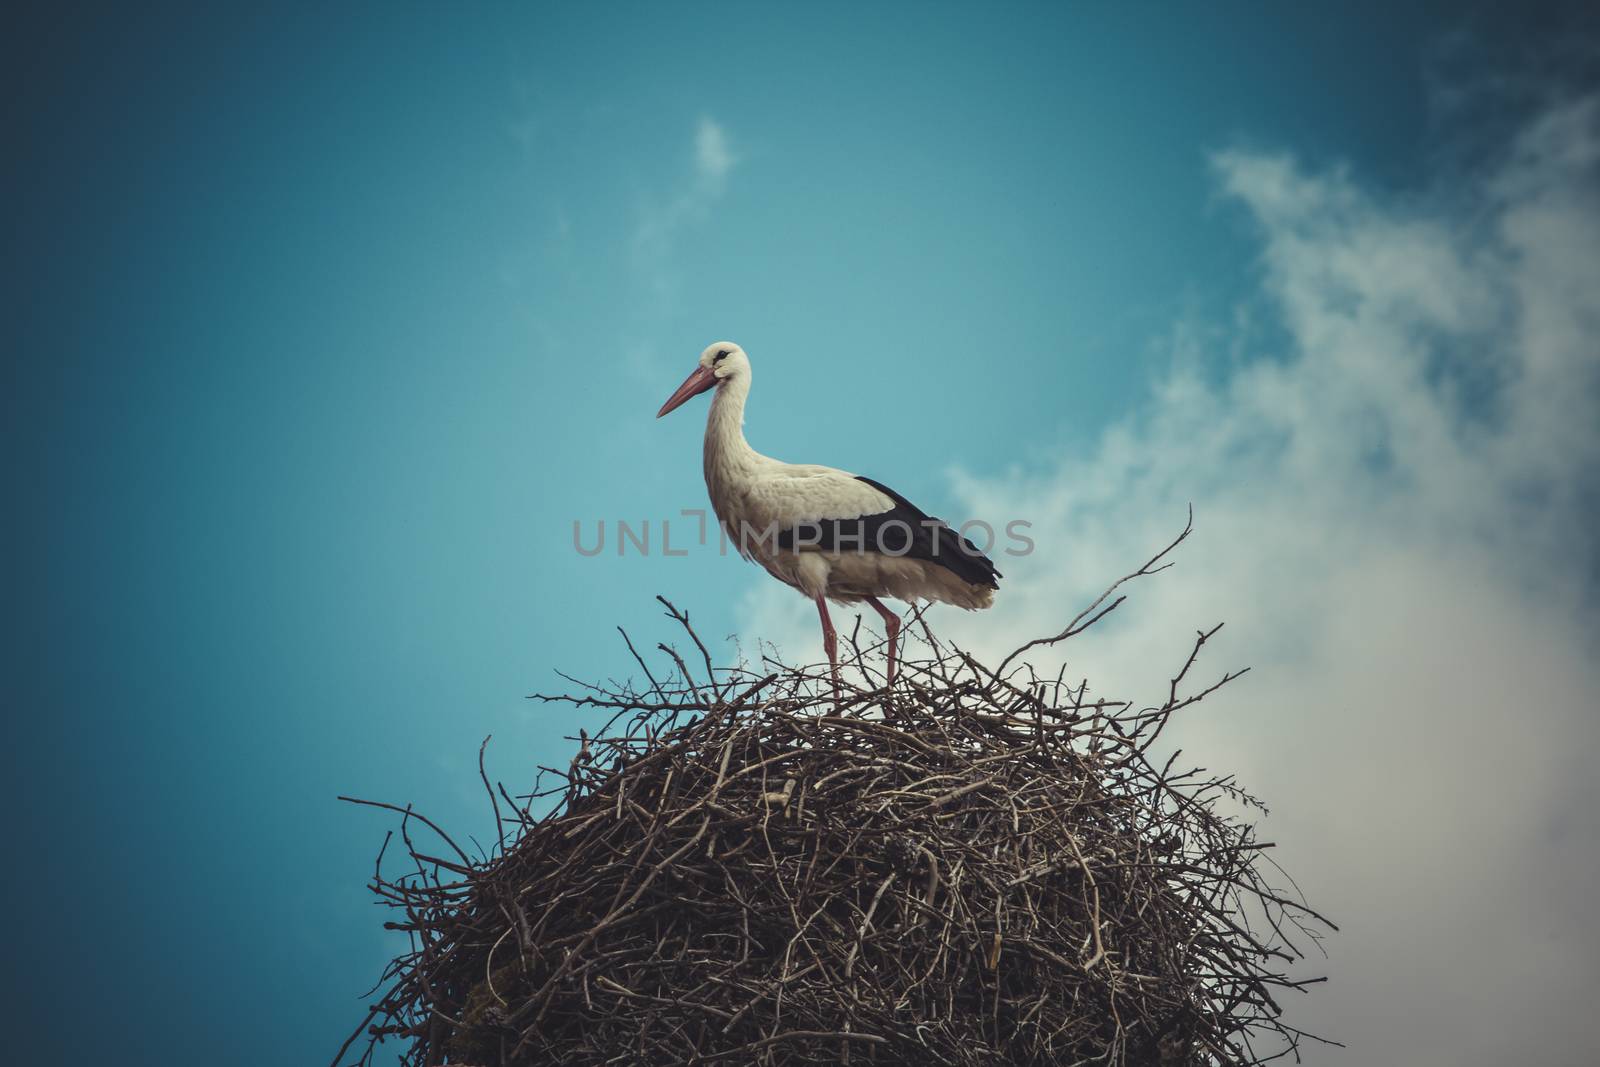 village, Stork nest made ������of tree branches over blue sky in dramatic